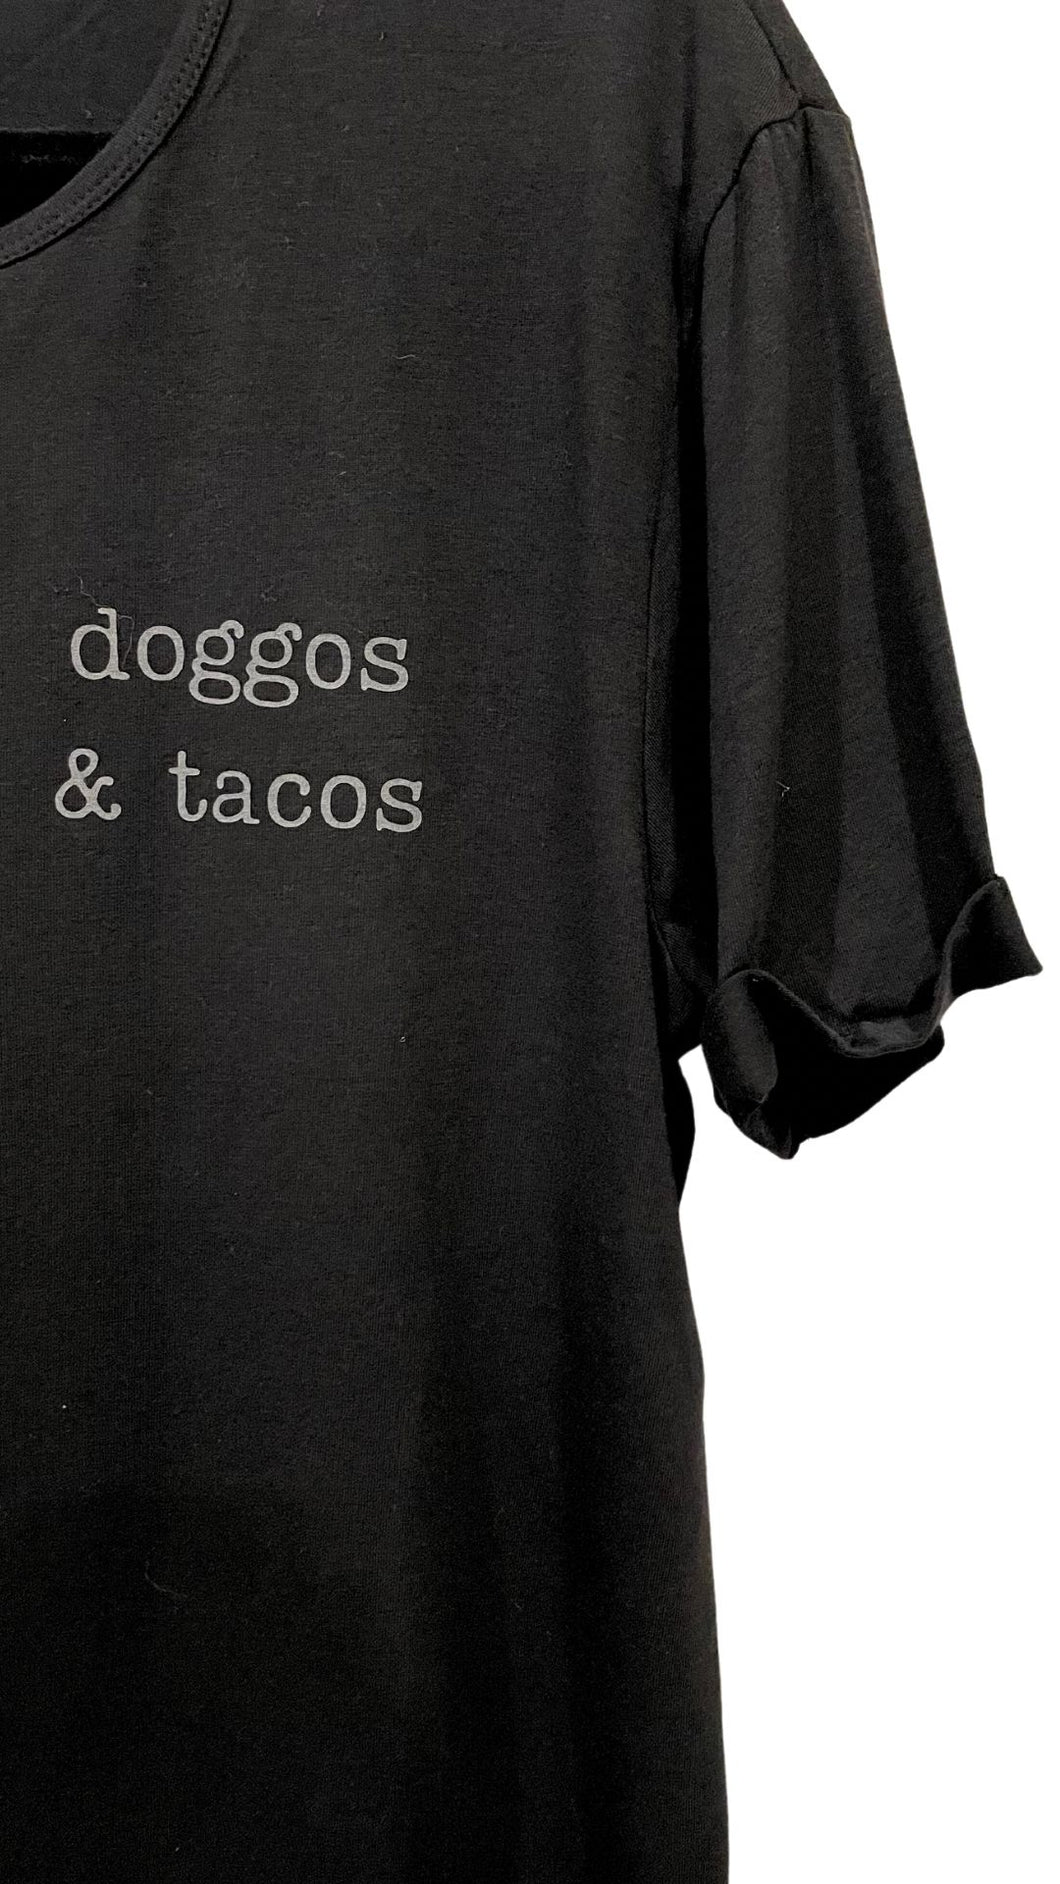 T-Shirt: Doggos & Tacos (M only, low stock)